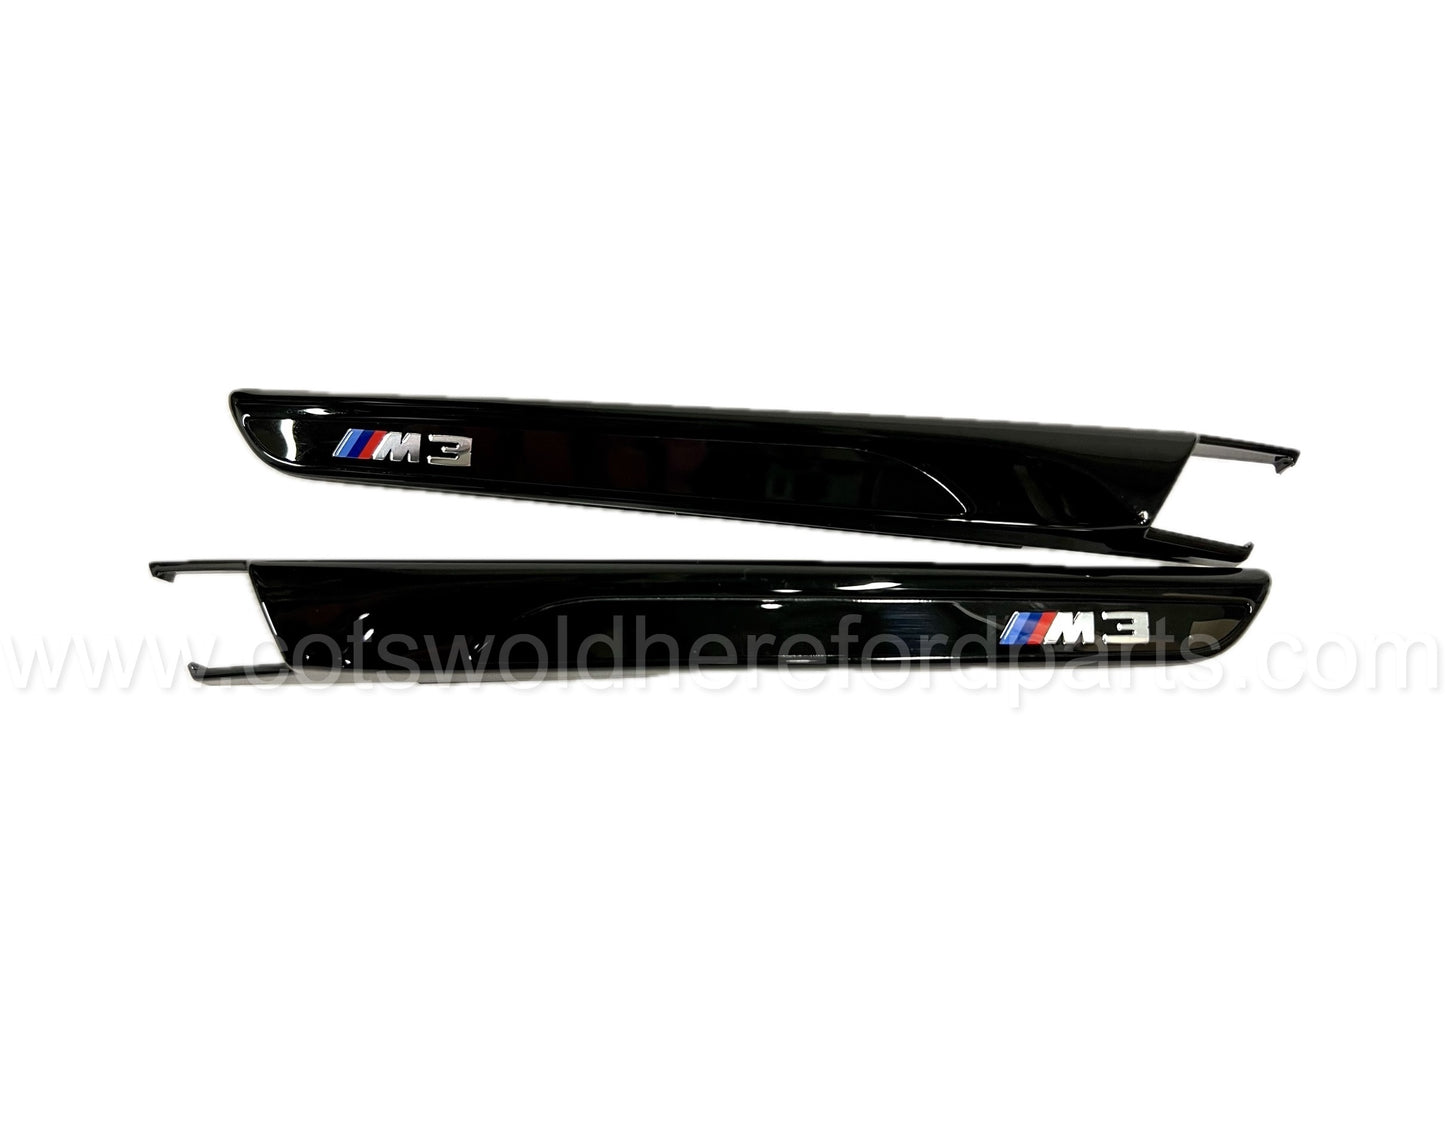 Genuine BMW M3 F80 M Performance Side Wing Vents 51148068587 /8